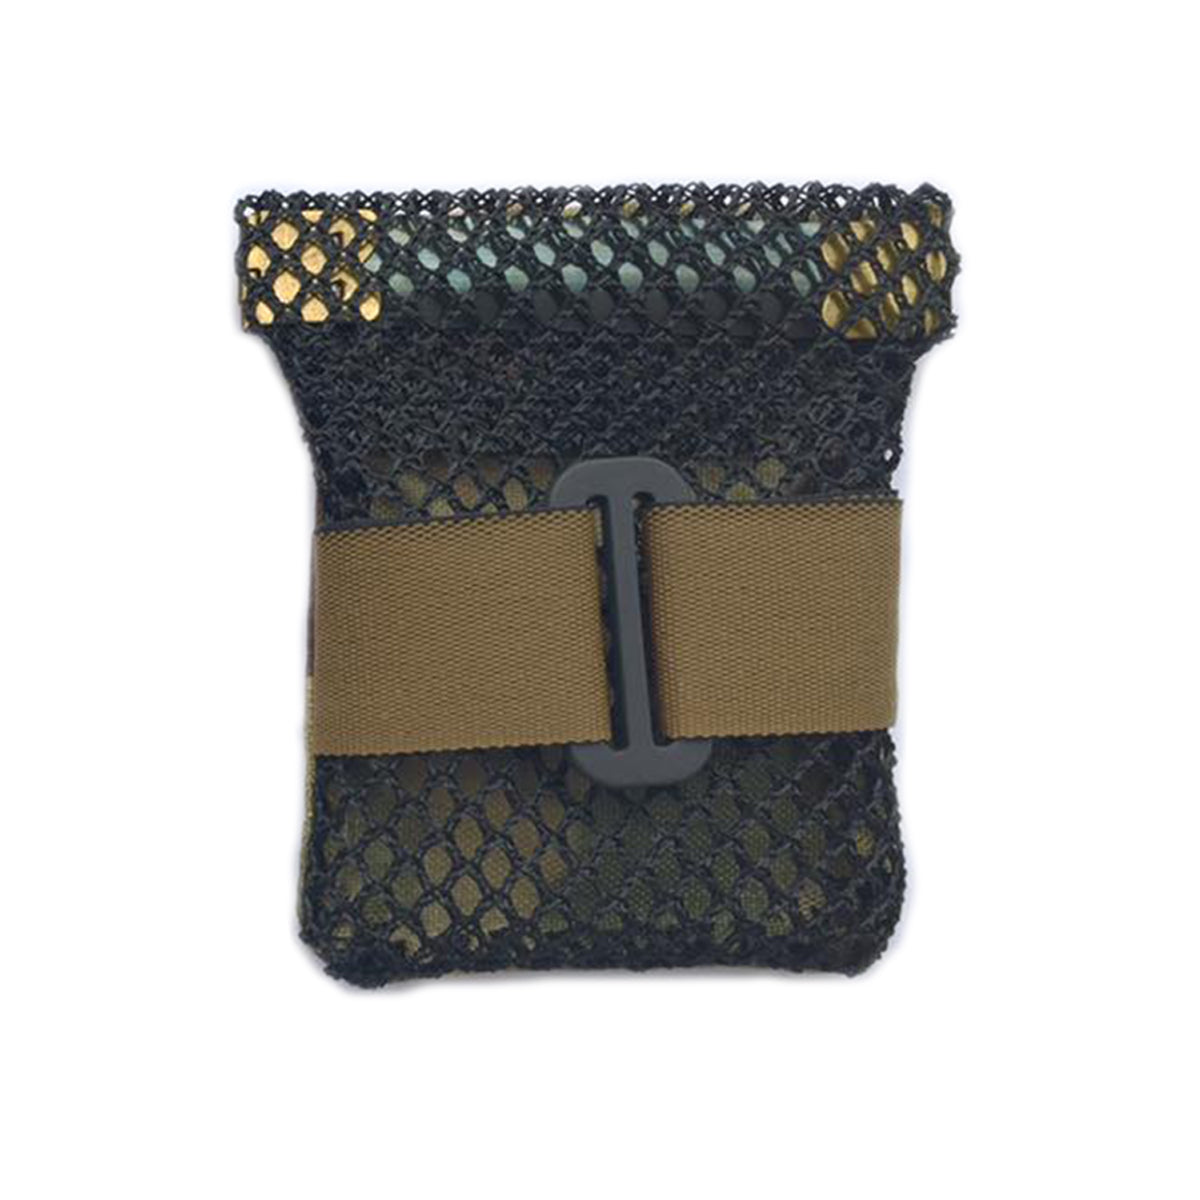 Phelps Game Calls Squeeze Call Pouch in Phelps Game Calls Squeeze Call Pouch by Phelps Game Calls | Gear - goHUNT Shop by GOHUNT | Phelps Game Calls - GOHUNT Shop